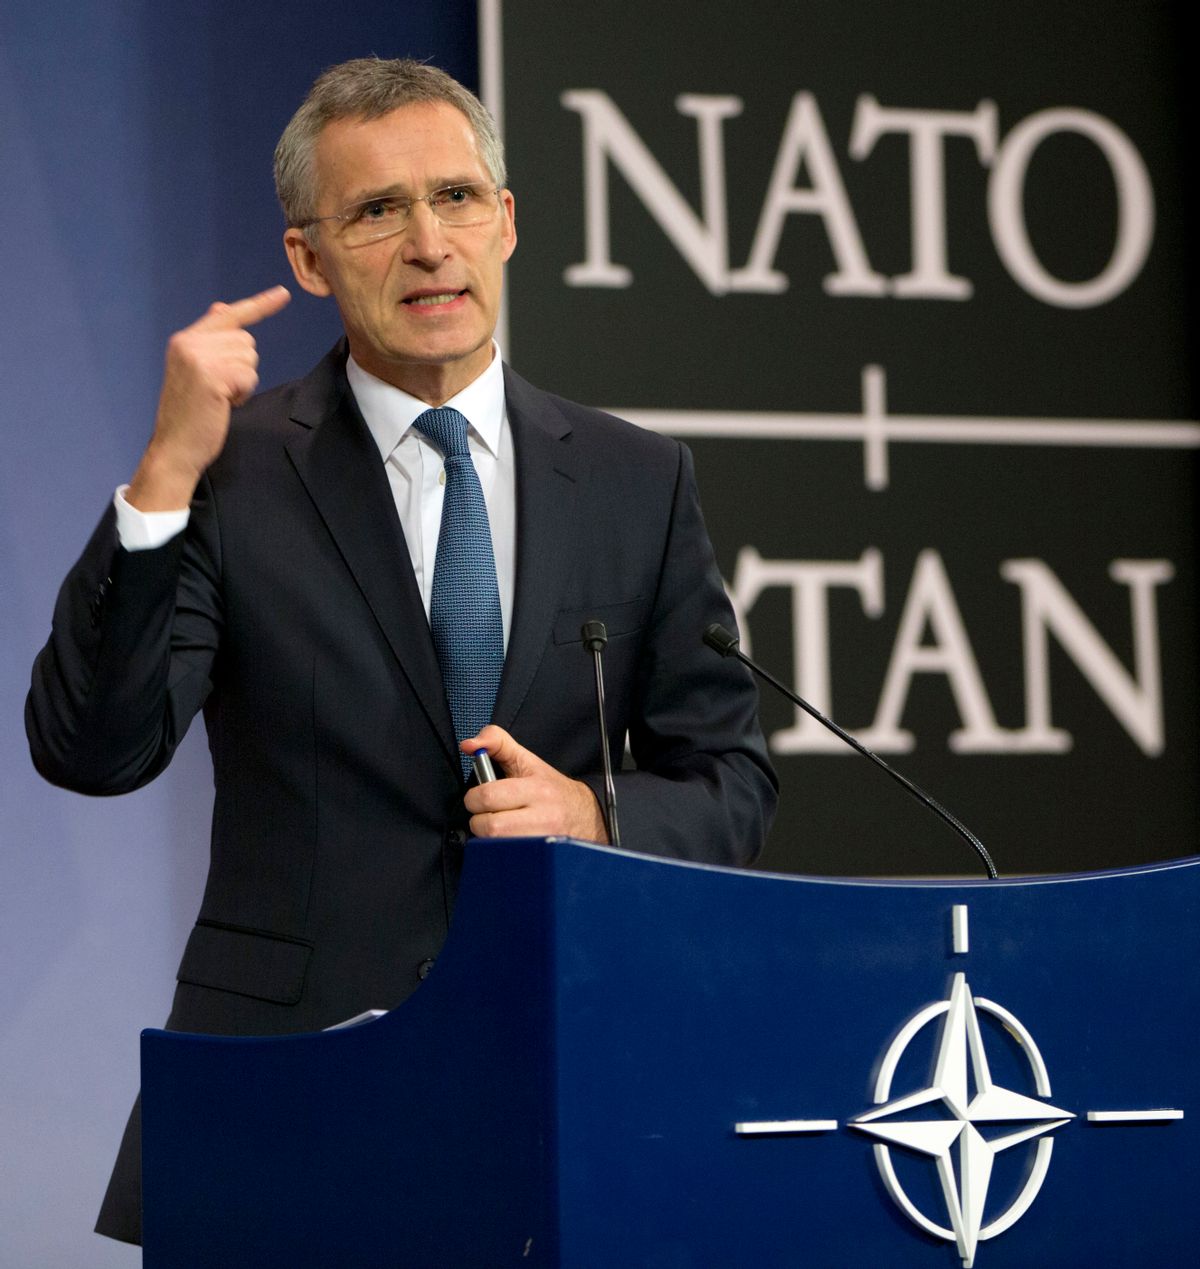 NATO Secretary General Jens Stoltenberg speaks during a media conference at NATO headquarters in Brussels on Tuesday, Feb. 14, 2017. NATO defense ministers will begin a two-day ministerial beginning on Wednesday. (AP Photo/Virginia Mayo) (AP)